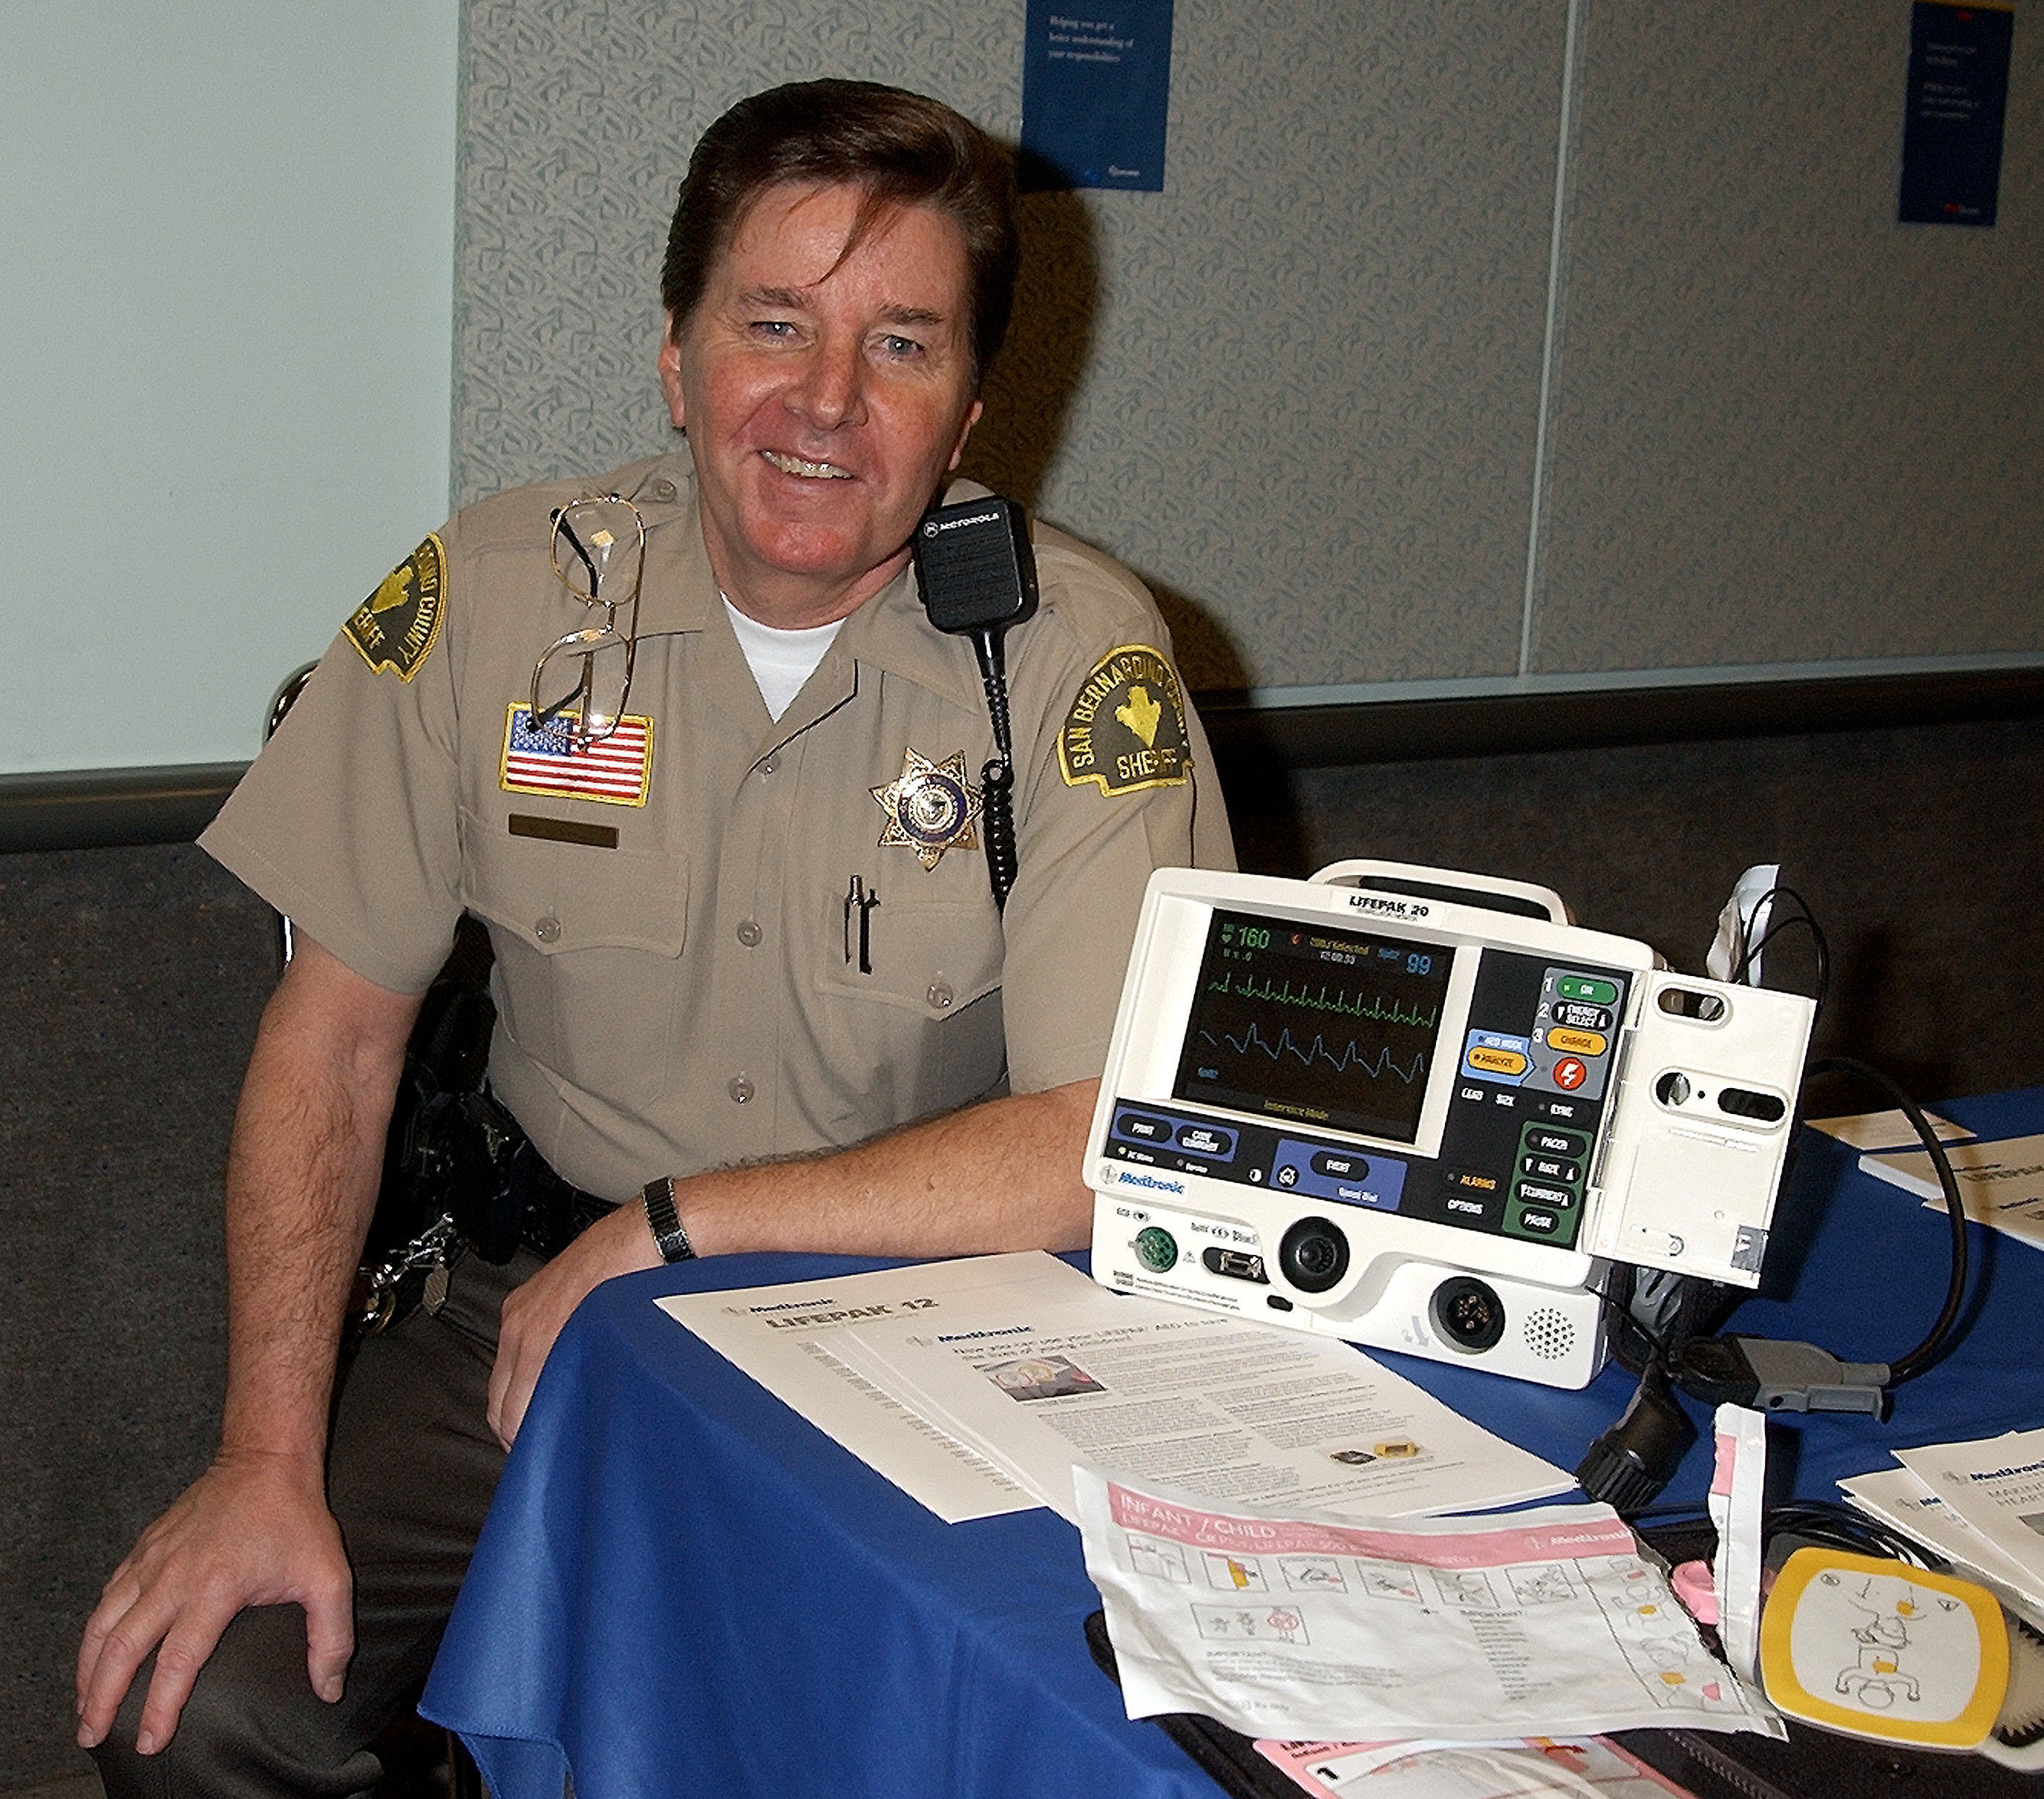 Musician turned EMT Bobby Sherman posing next to a Life Pak 20 Defibrillator / Monitor. / Source: Getty Images